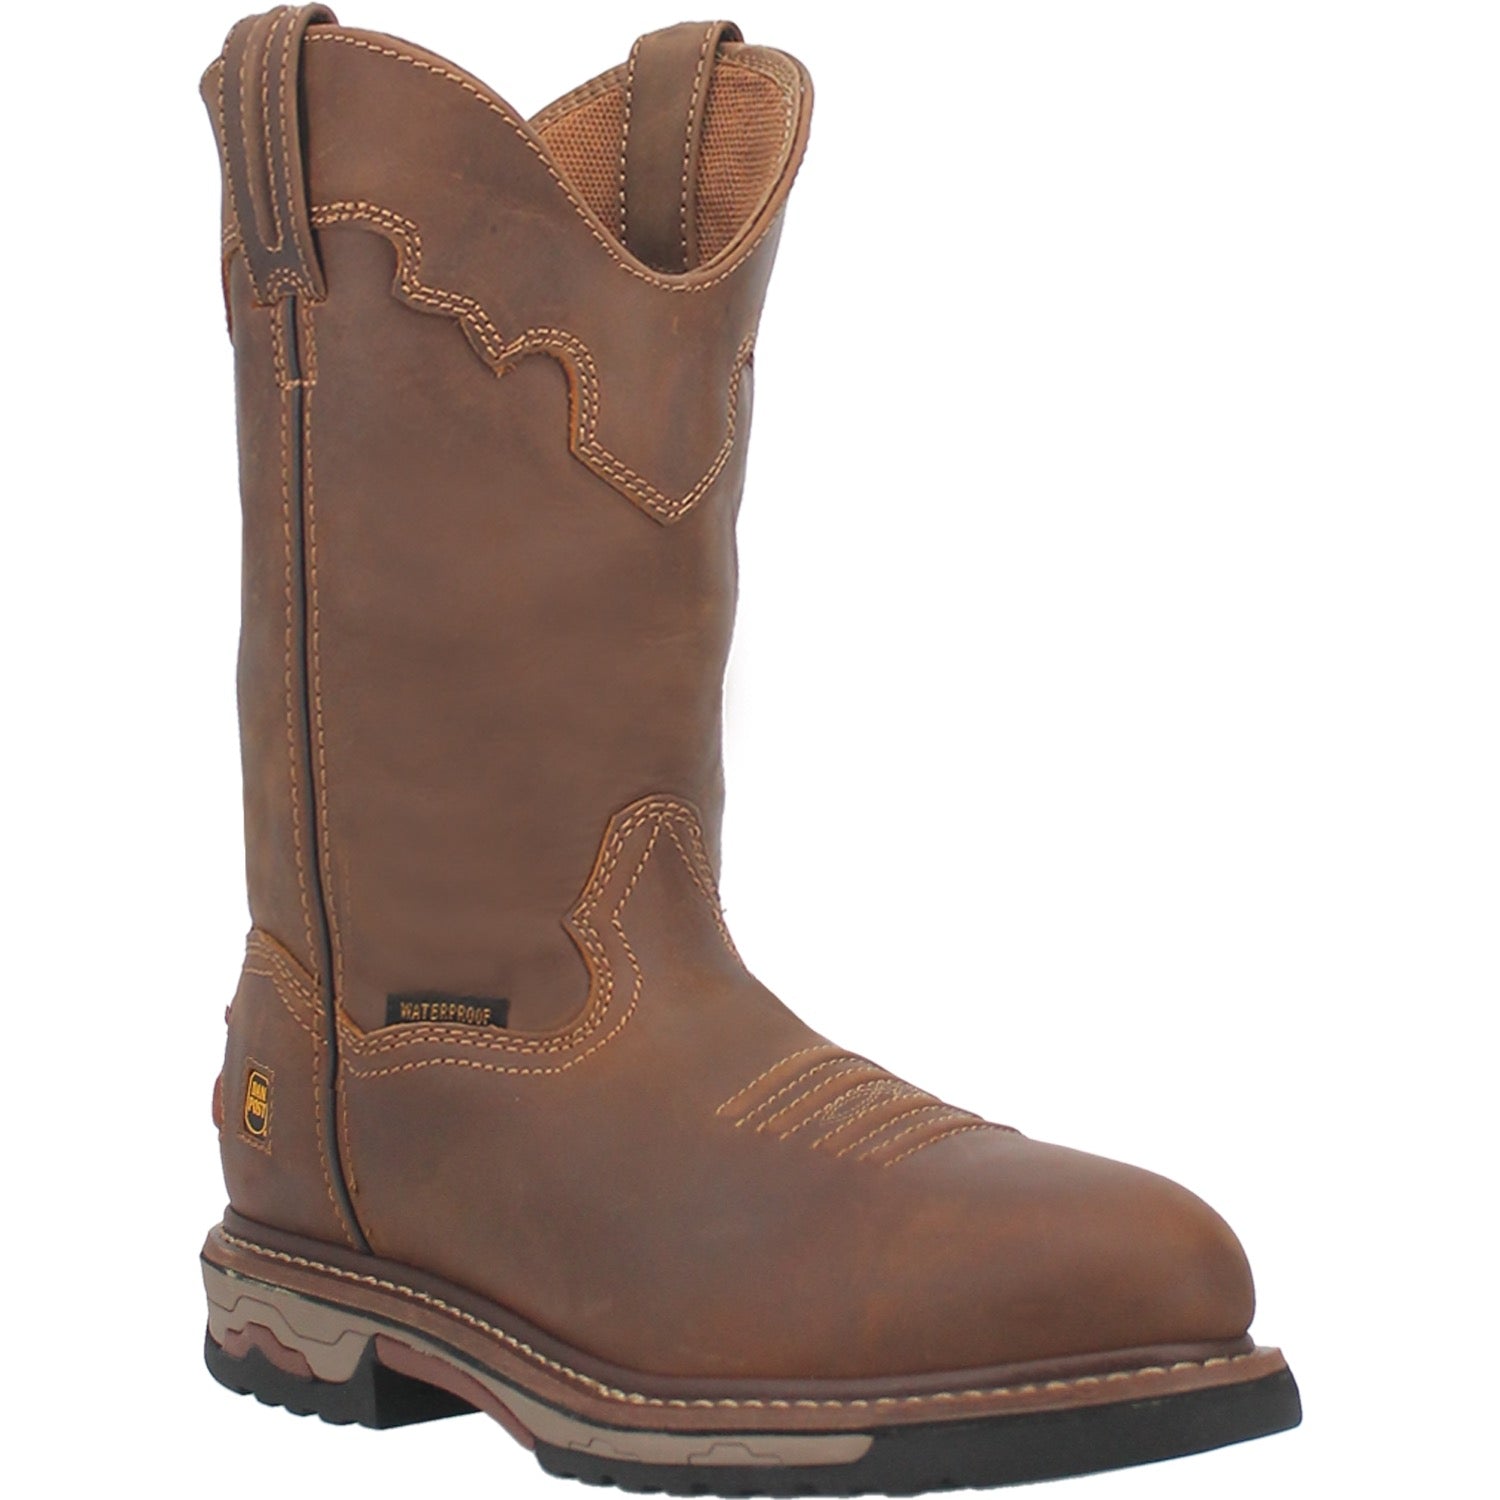 JOURNEYMAN COMPOSITE TOE LEATHER BOOT Cover